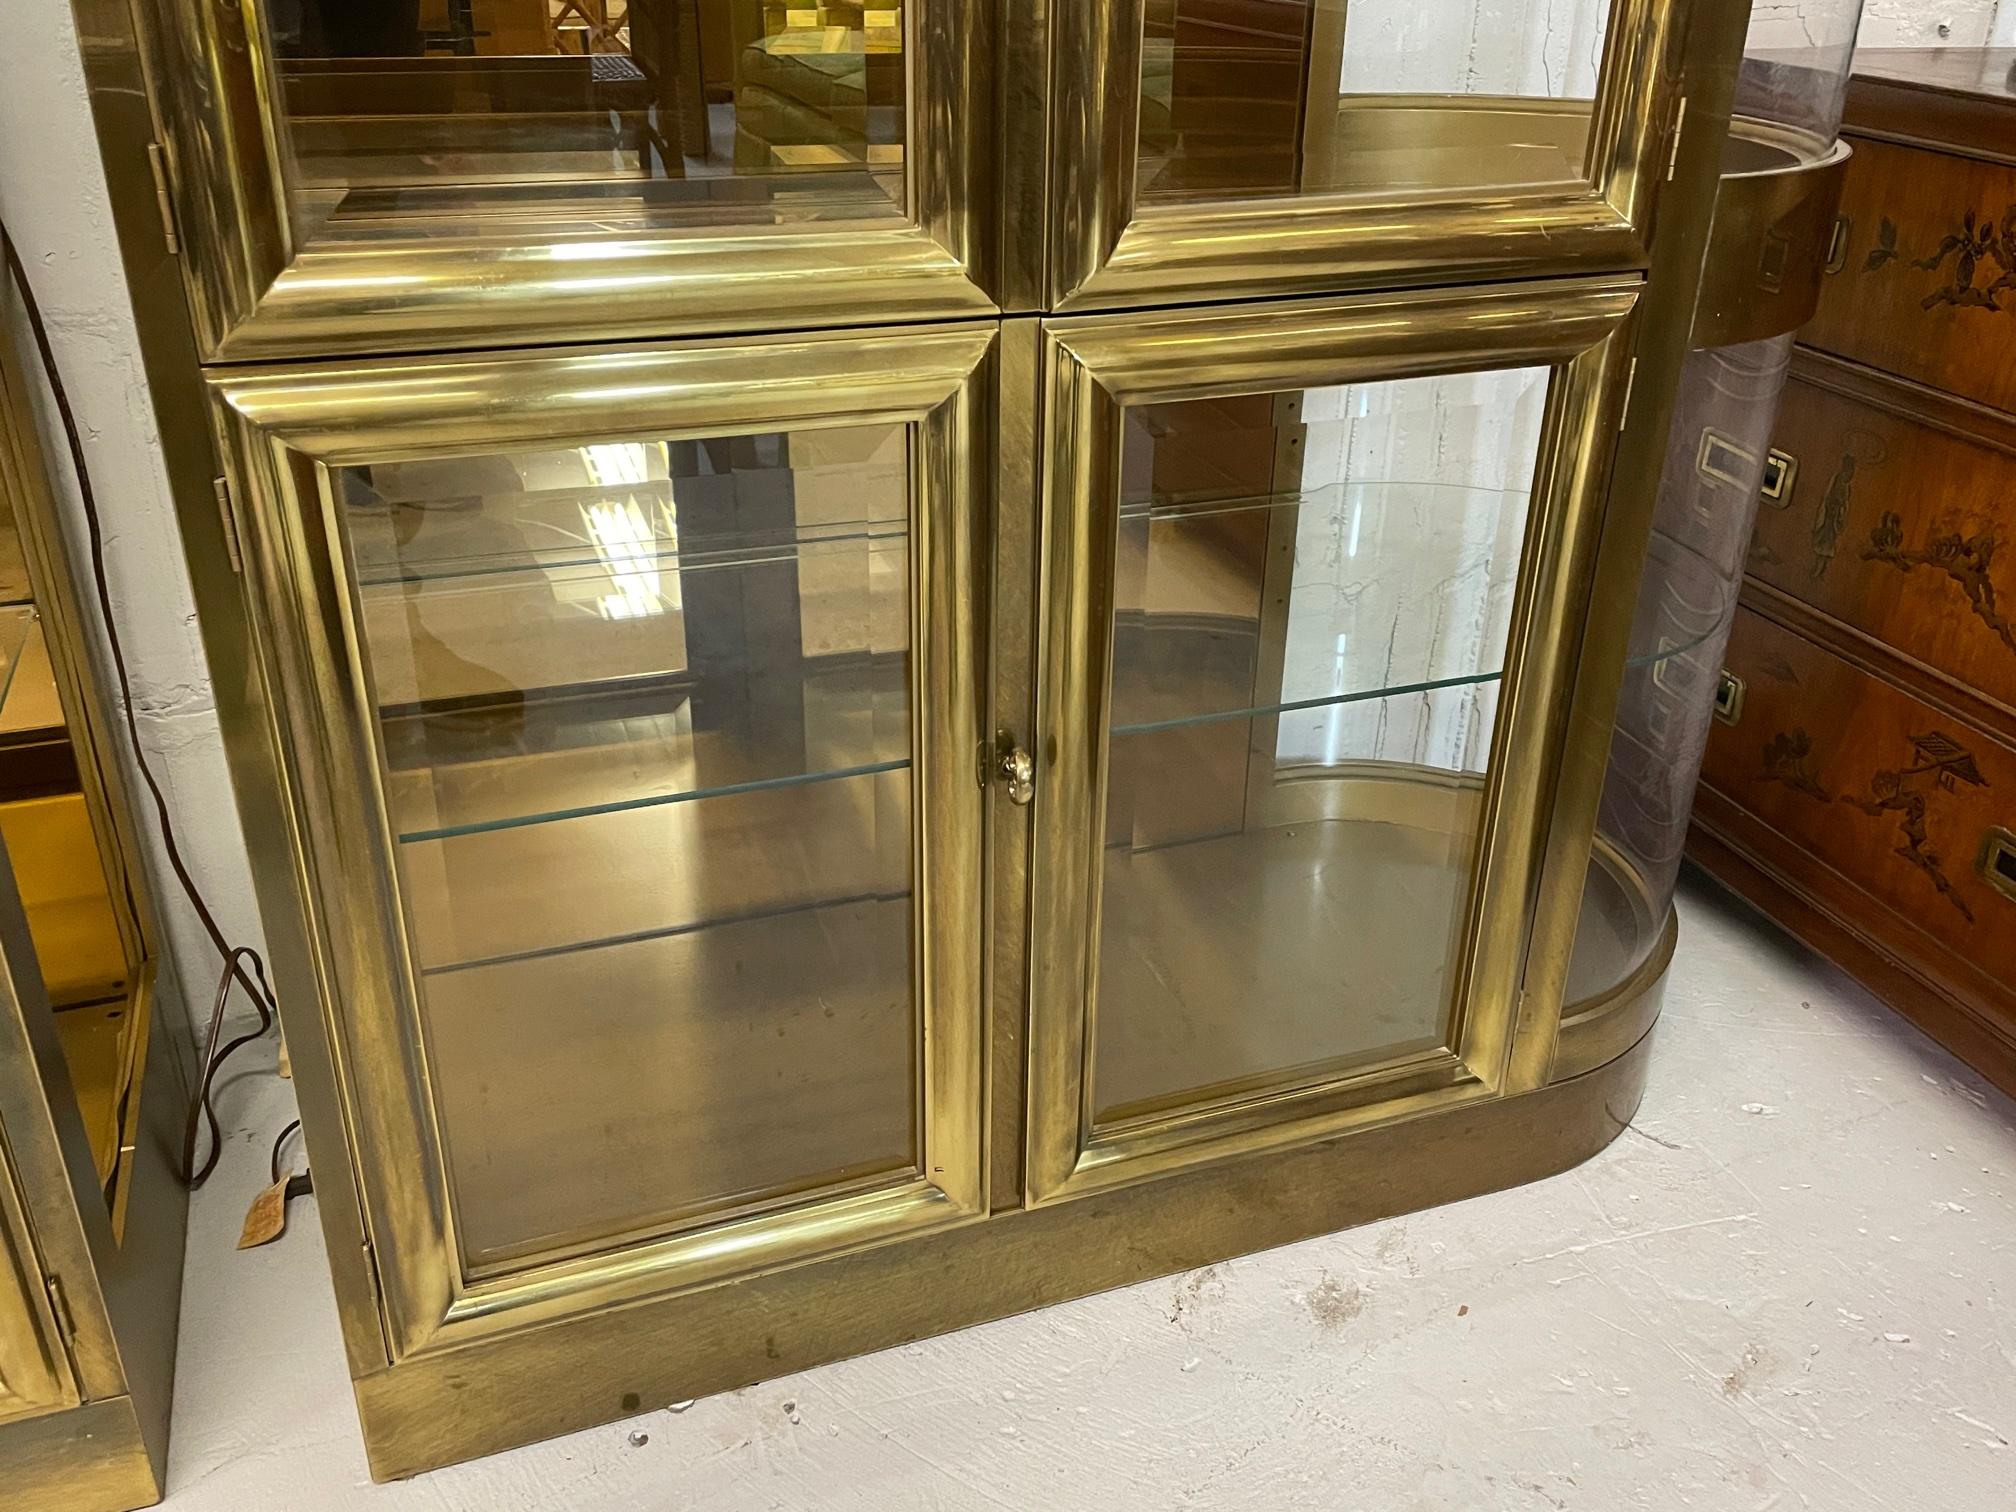 American Mastercraft Brass and Glass Display or Vitrine Cabinets, a Pair